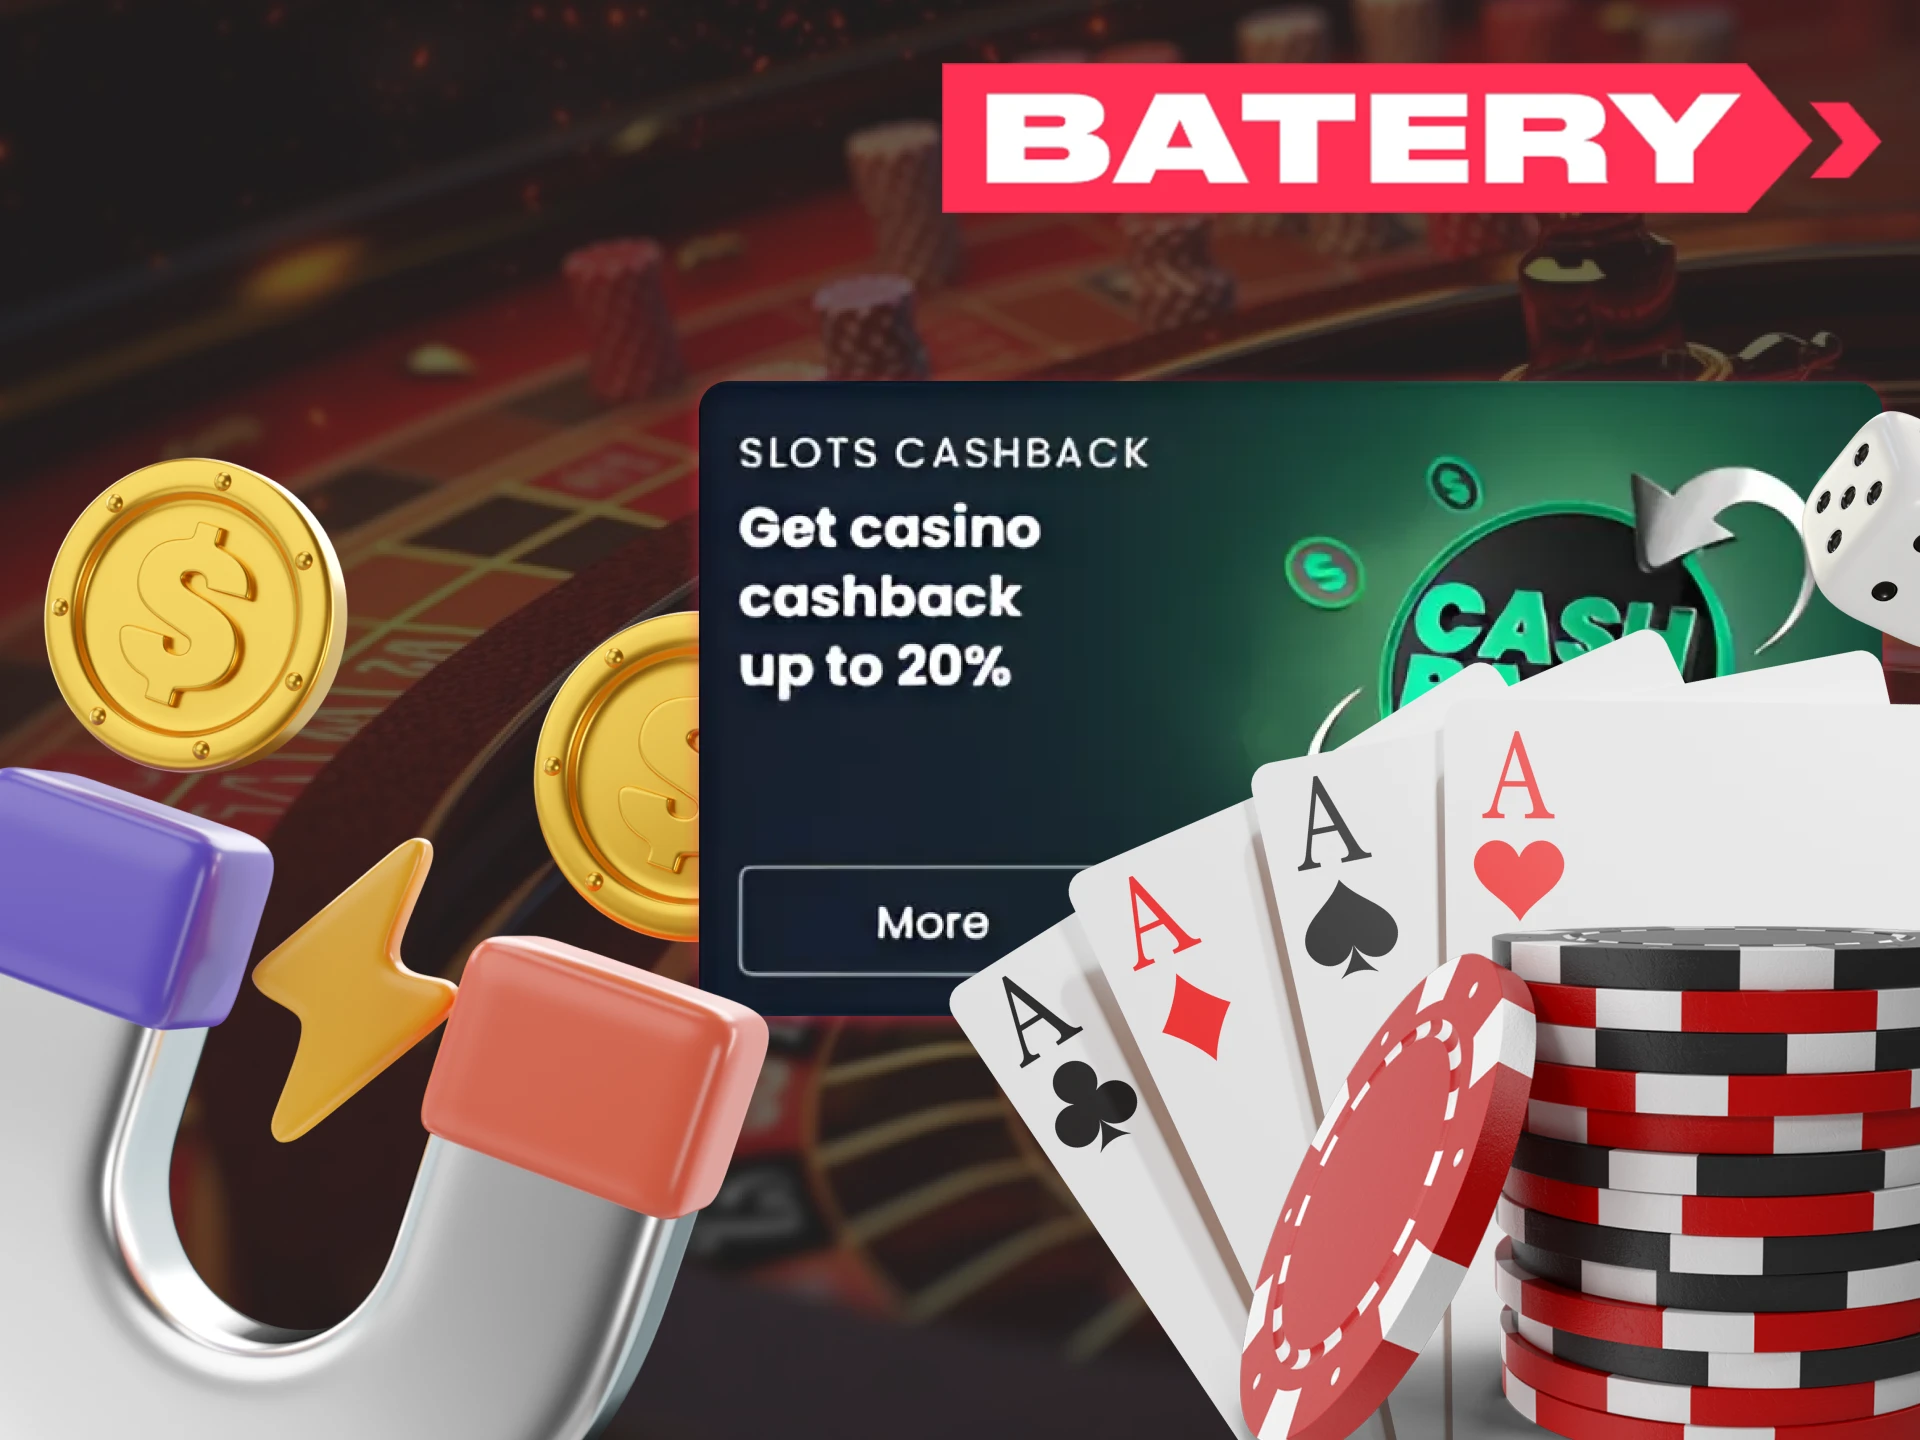 Get weekly cashback when you play at the Batery slots.